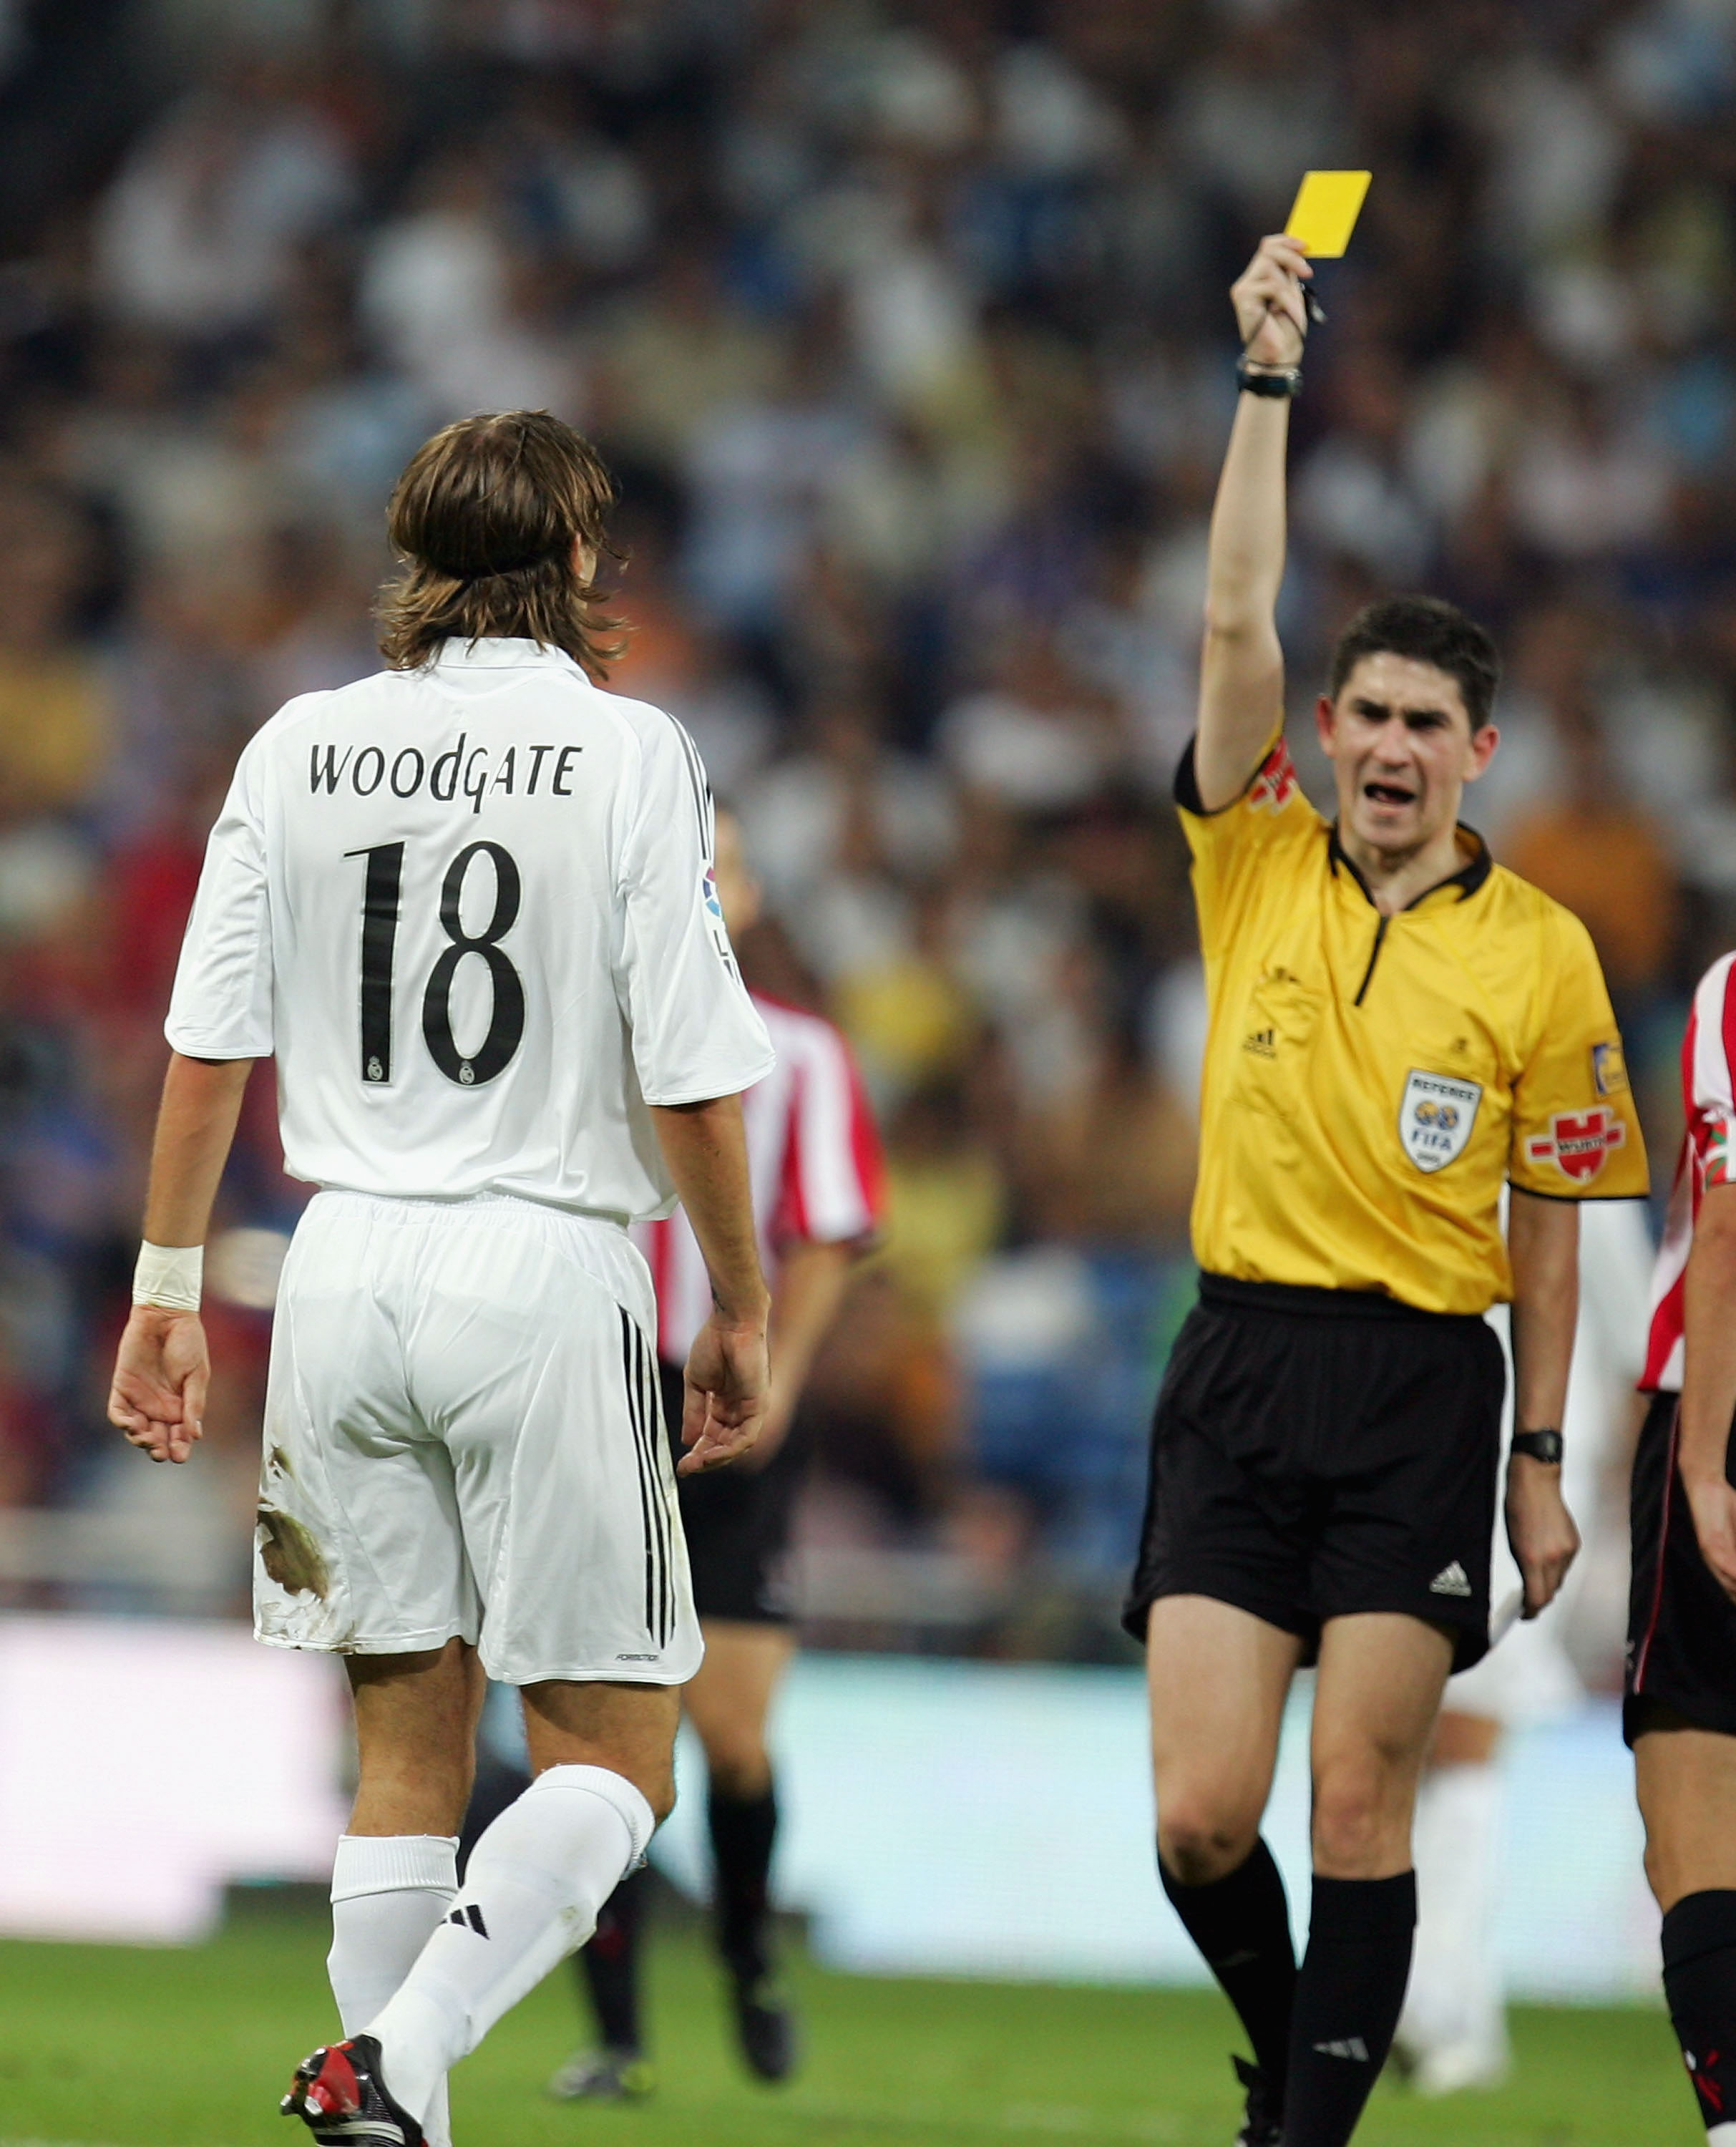 MADRID, SPAIN - SEPTEMBER 22: Jonathan Woodgate of Real Madrid gets a yellow card during the Primera Liga soccer match between Real Madrid and Athletic Bilbao at the Bernabeu on September 22, 2005, in Madrid, Spain.  (Photo by Denis Doyle/Getty Images)